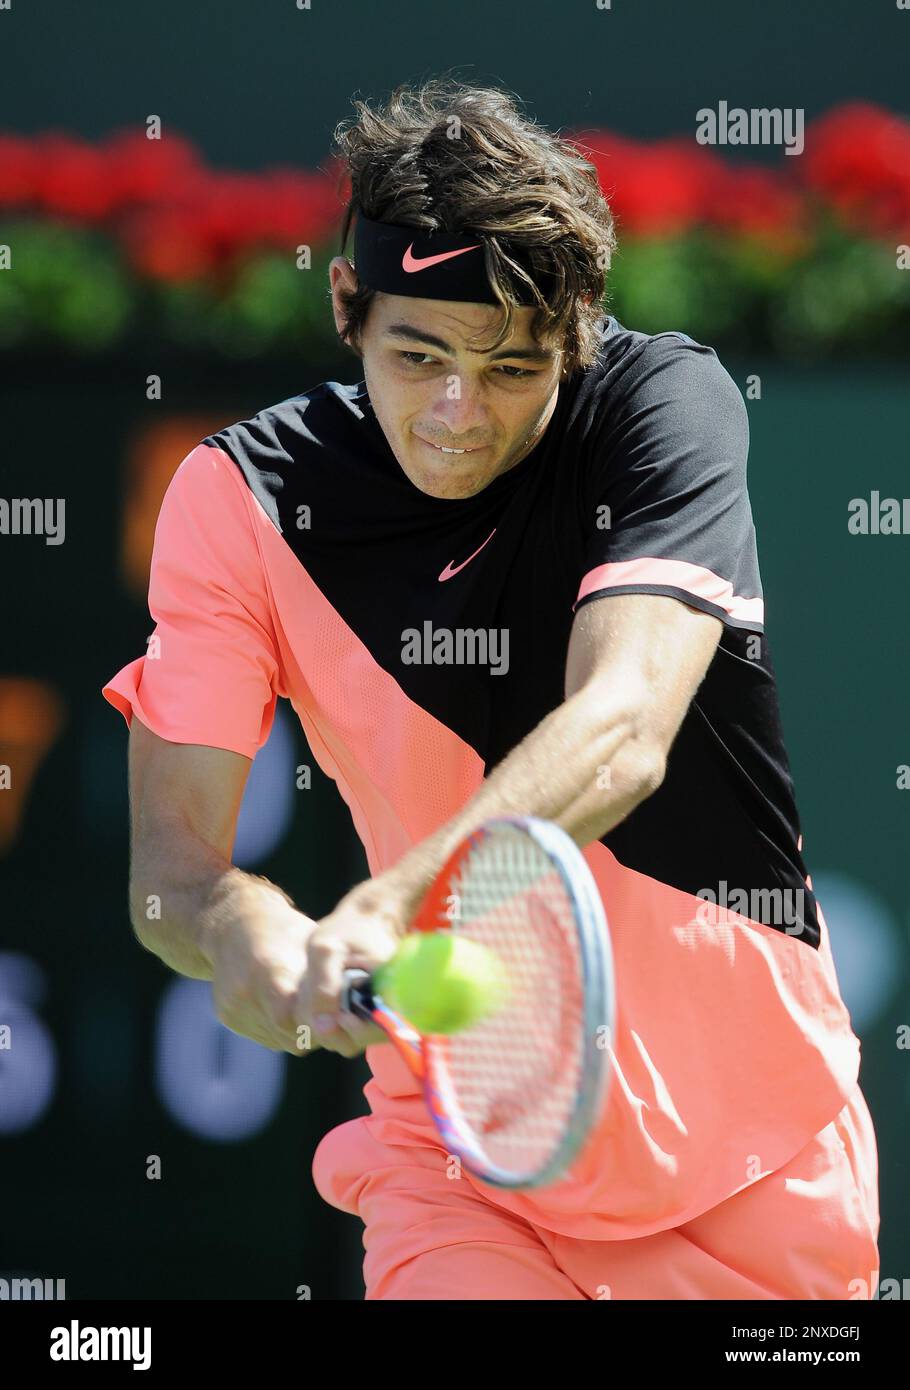 INDIAN WELLS, CA - MARCH 14: ATP tennis player Taylor Fritz (USA) hits a  shot in the second set of a match played during the BNP Paribas Open at the Indian  Wells